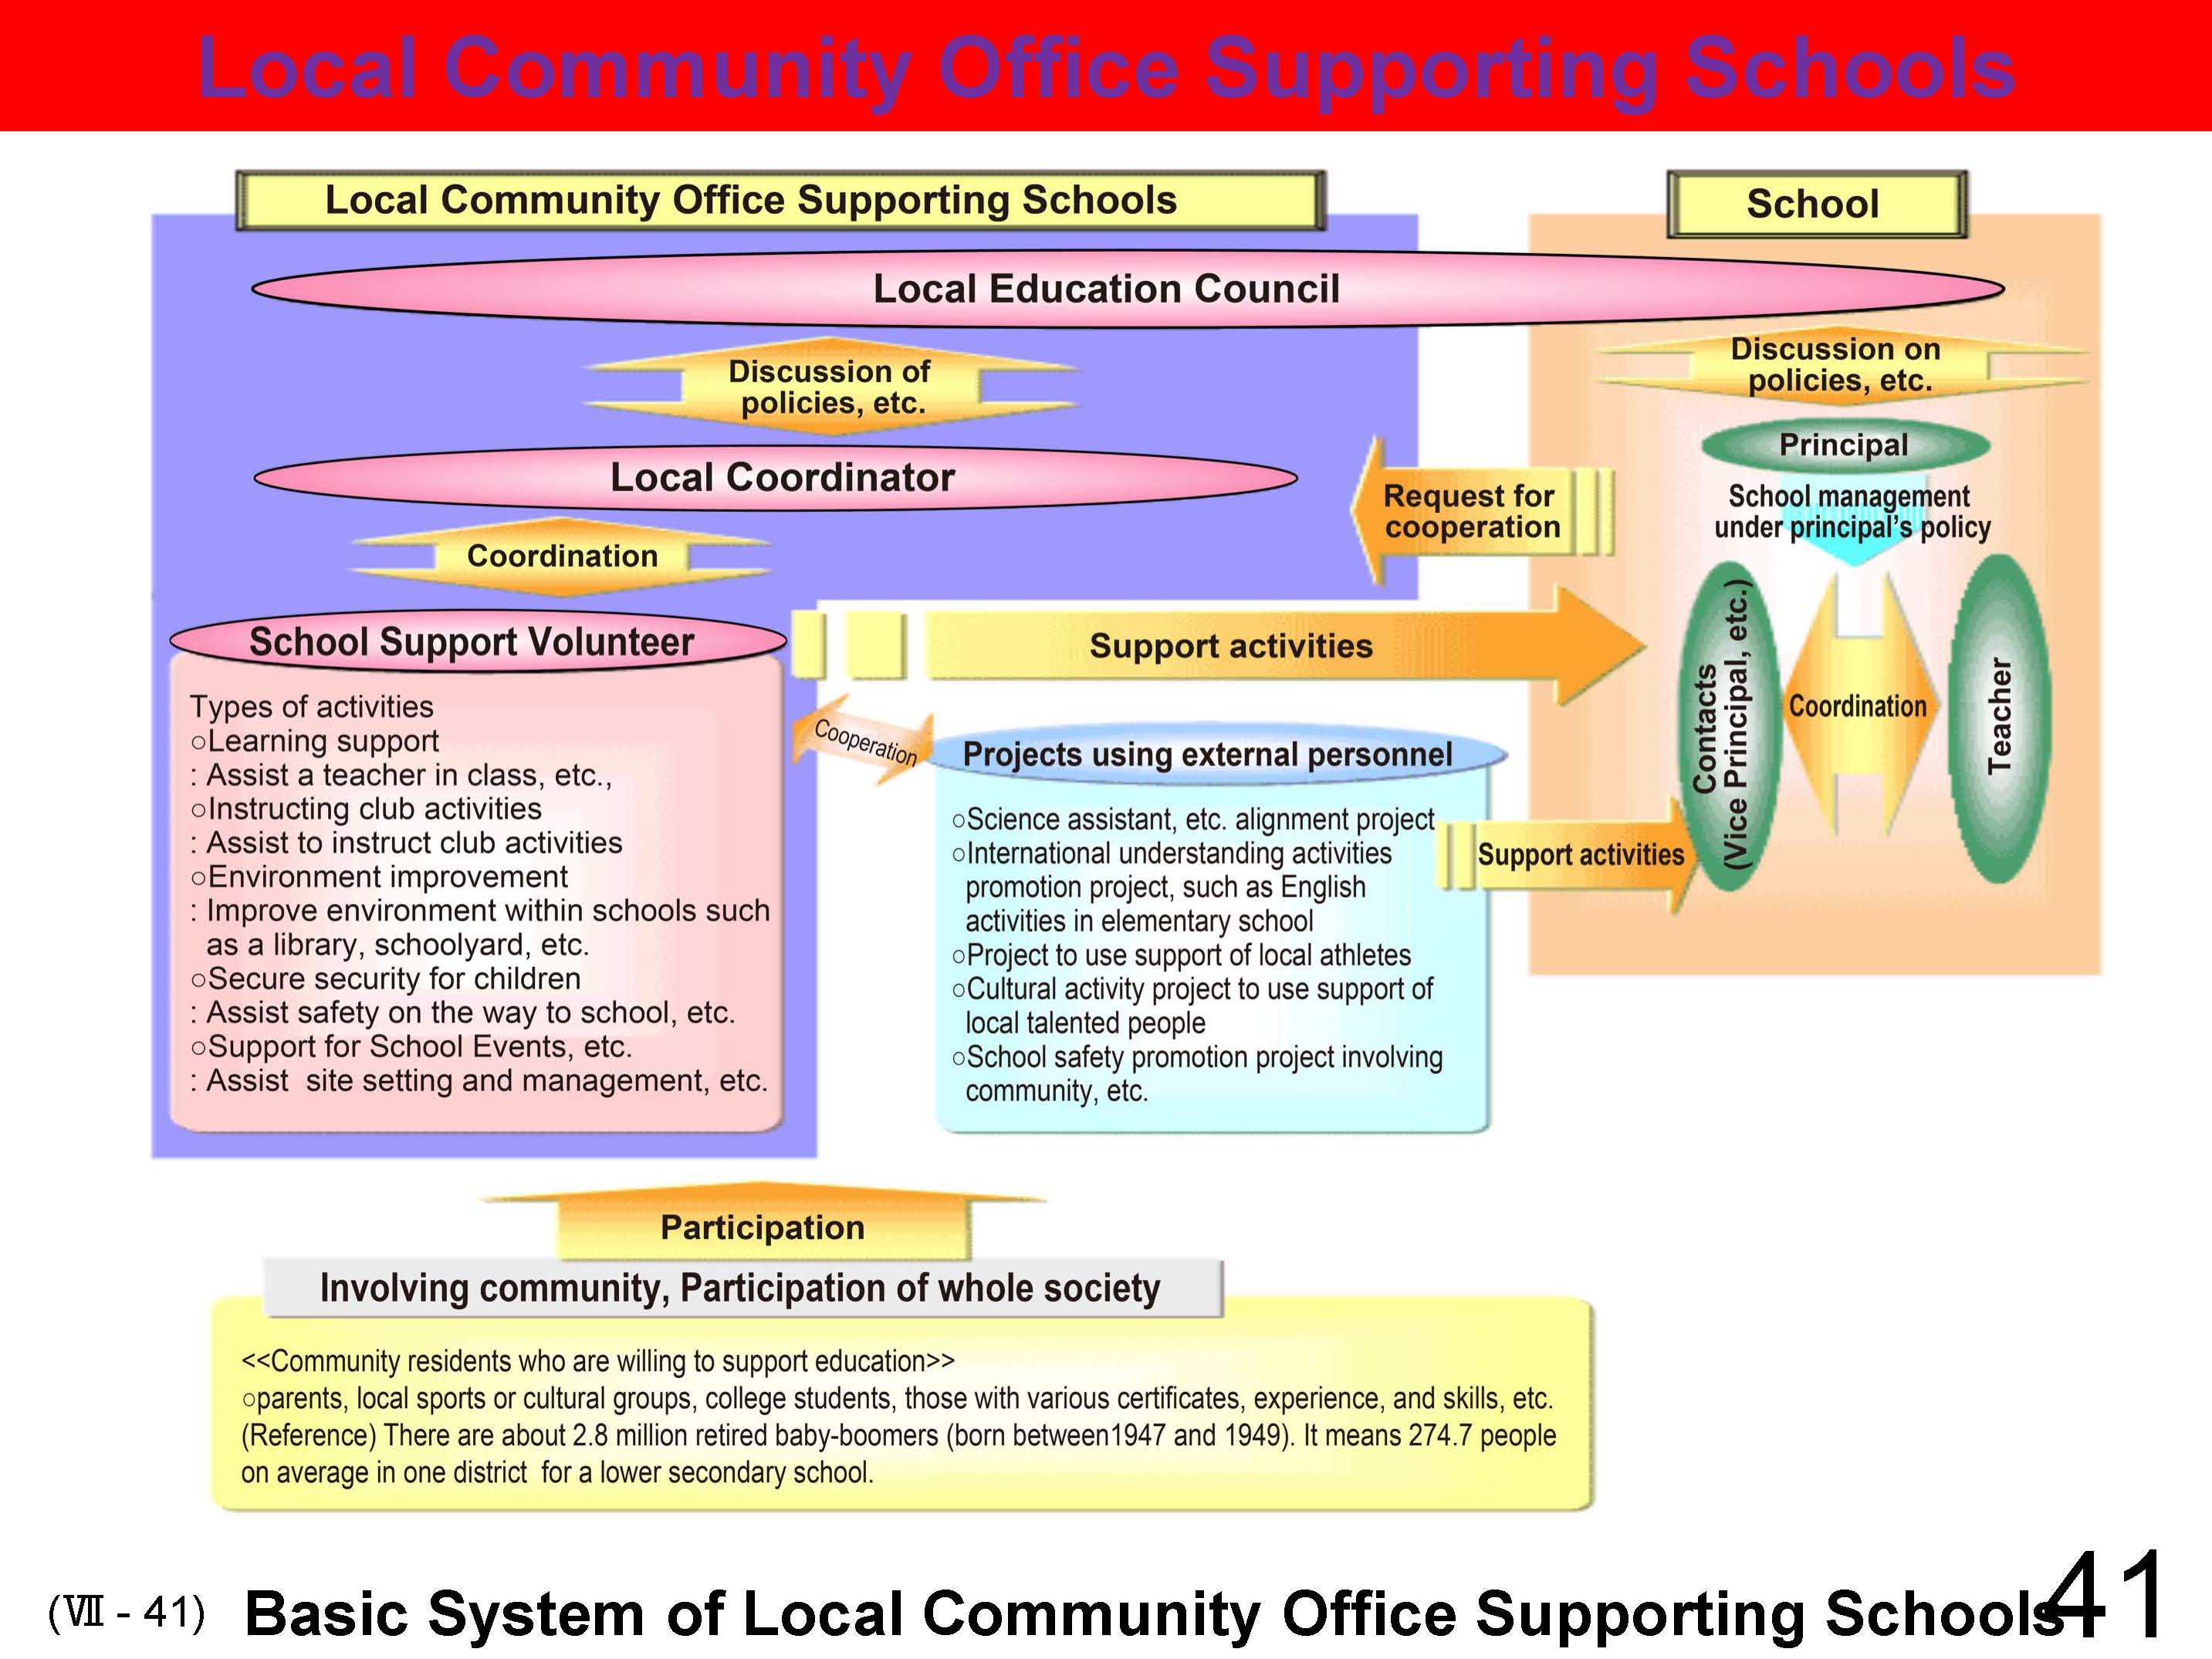 VII Cooperation between School and Local Community